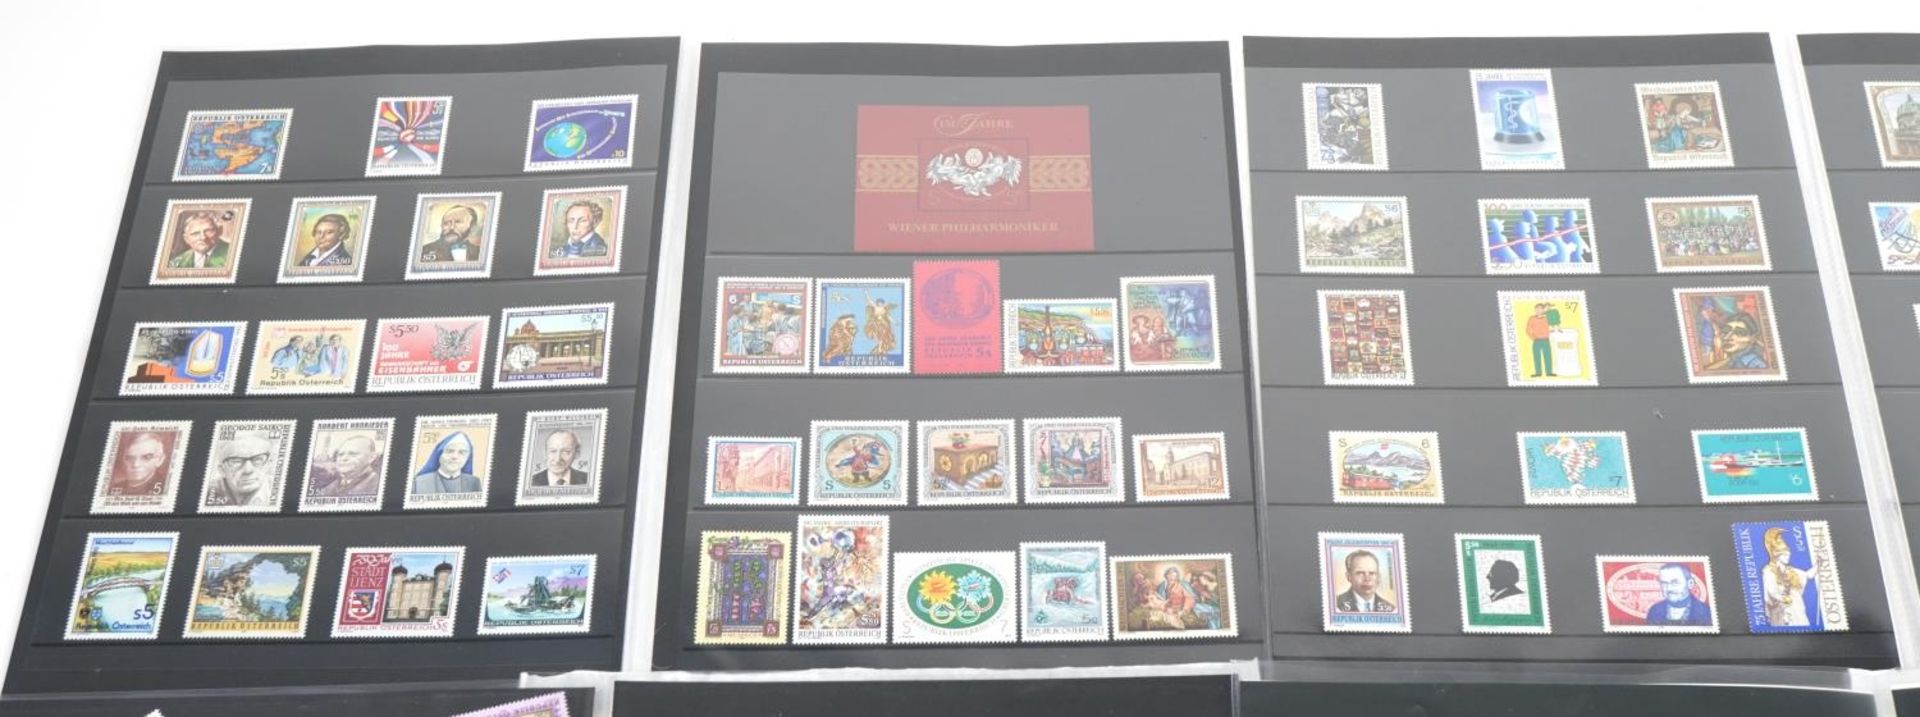 Six Austrian year packs with unmounted stamps, 1990-1995, face value £481.60 : For further - Image 2 of 6